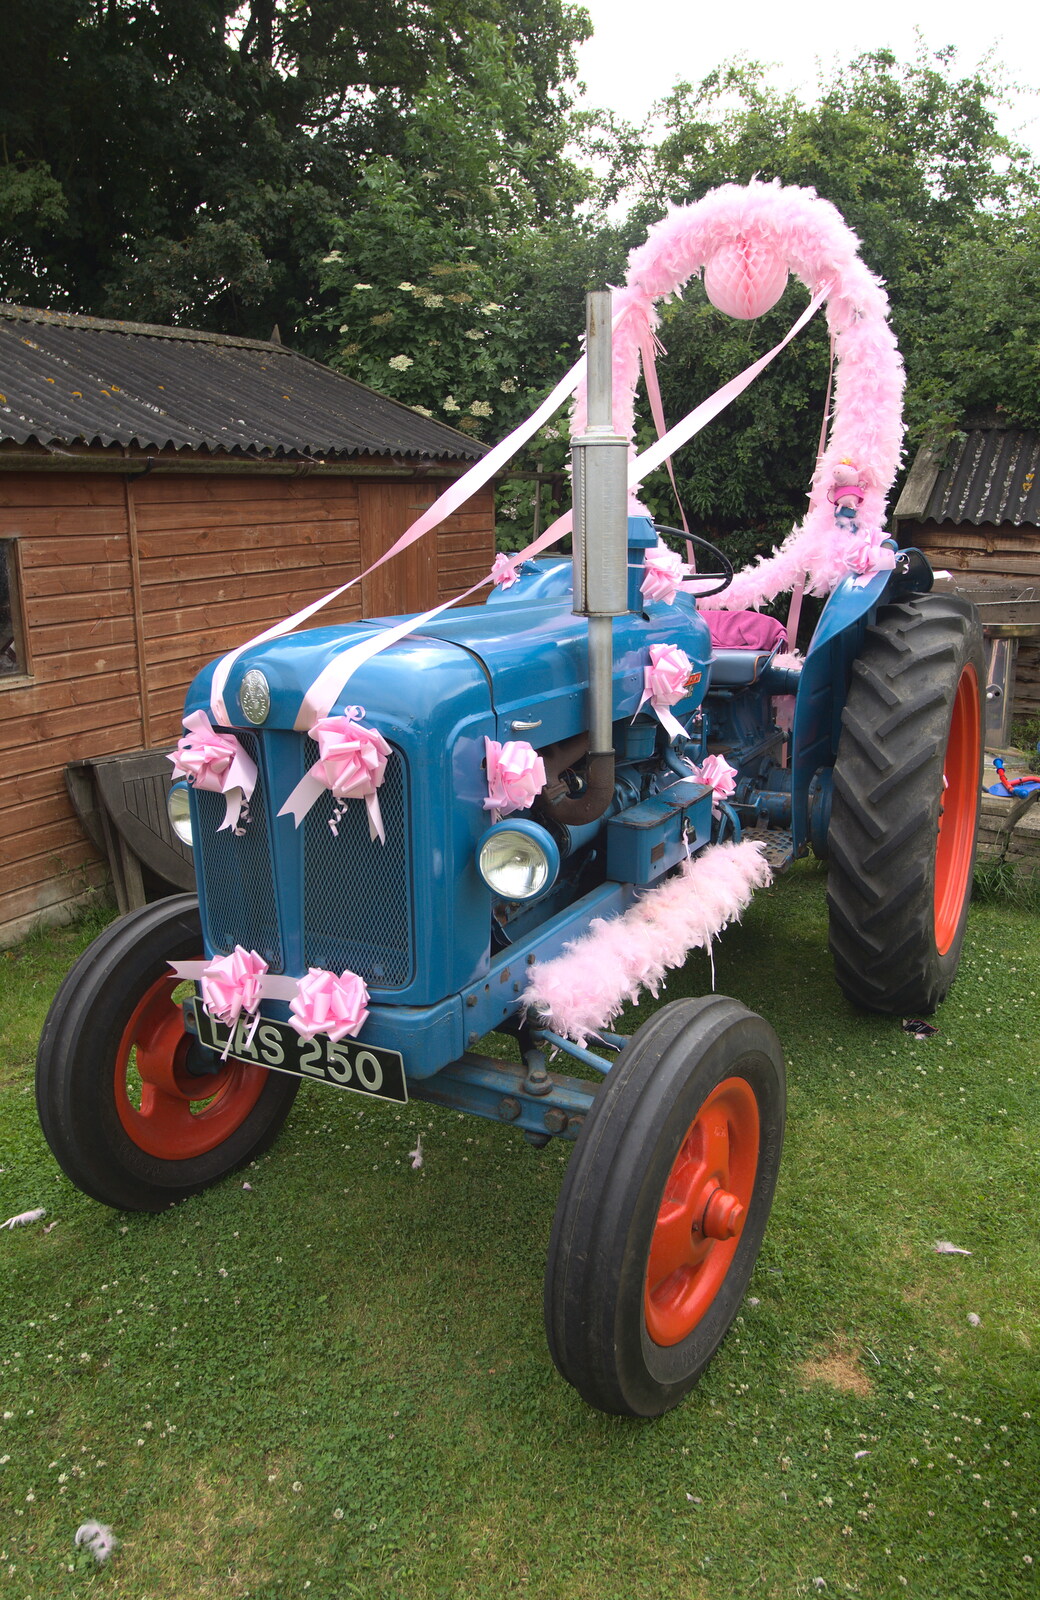 The pink Fordson tractor from The BSCC at Pulham Crown, and Grandad with a Grinder, Brome, Suffolk - 11th July 2013